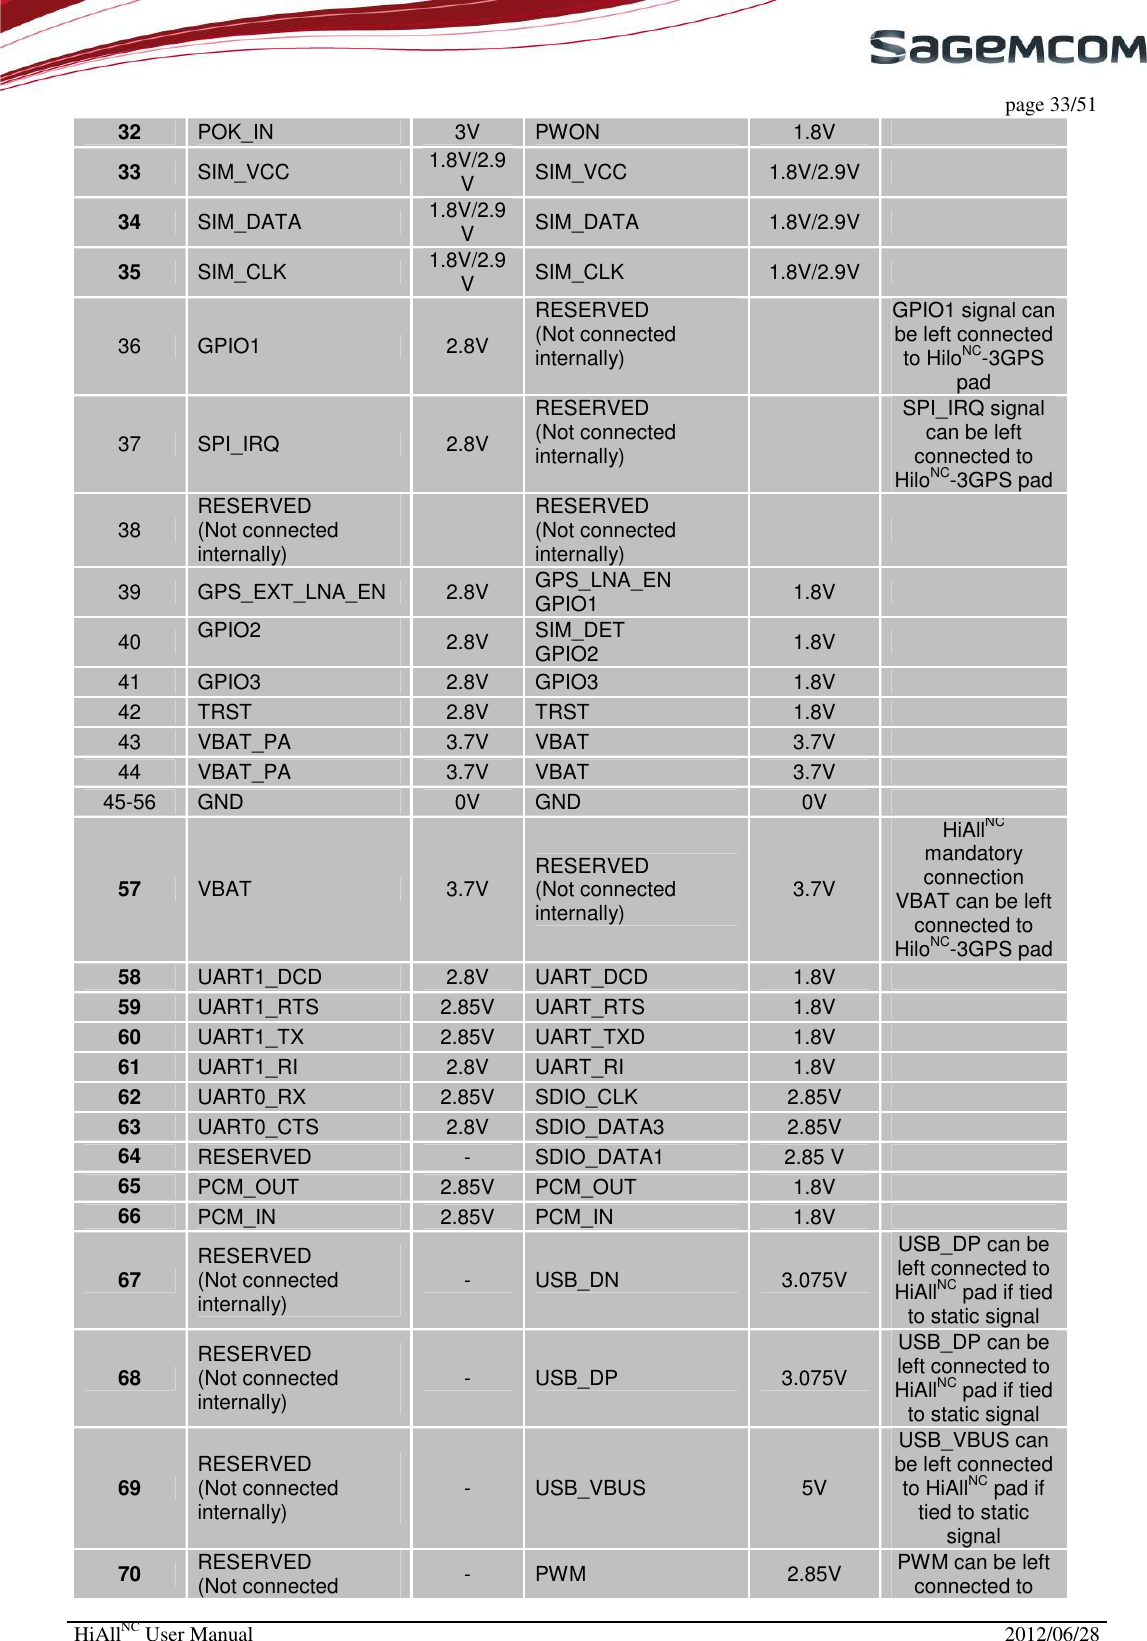     page 33/51 HiAllNC User Manual  2012/06/28  32  POK_IN 3V  PWON  1.8V   33  SIM_VCC 1.8V/2.9V  SIM_VCC  1.8V/2.9V   34  SIM_DATA 1.8V/2.9V  SIM_DATA  1.8V/2.9V   35  SIM_CLK 1.8V/2.9V  SIM_CLK  1.8V/2.9V   36  GPIO1  2.8V RESERVED (Not connected internally)   GPIO1 signal can be left connected to HiloNC-3GPS pad 37  SPI_IRQ  2.8V RESERVED (Not connected internally)   SPI_IRQ signal can be left connected to HiloNC-3GPS pad 38  RESERVED (Not connected internally)    RESERVED (Not connected internally)     39  GPS_EXT_LNA_EN 2.8V  GPS_LNA_EN GPIO1  1.8V   40  GPIO2  2.8V  SIM_DET GPIO2  1.8V   41  GPIO3 2.8V  GPIO3  1.8V   42  TRST 2.8V  TRST  1.8V   43  VBAT_PA 3.7V  VBAT   3.7V   44  VBAT_PA 3.7V  VBAT  3.7V   45-56  GND 0V  GND  0V   57  VBAT 3.7V  RESERVED (Not connected internally)  3.7V HiAllNC mandatory connection VBAT can be left connected to HiloNC-3GPS pad 58  UART1_DCD 2.8V  UART_DCD  1.8V   59  UART1_RTS 2.85V  UART_RTS  1.8V   60  UART1_TX 2.85V  UART_TXD  1.8V   61  UART1_RI 2.8V  UART_RI  1.8V   62  UART0_RX  2.85V  SDIO_CLK  2.85V   63  UART0_CTS 2.8V  SDIO_DATA3  2.85V   64  RESERVED -  SDIO_DATA1  2.85 V   65  PCM_OUT 2.85V  PCM_OUT  1.8V   66  PCM_IN 2.85V  PCM_IN  1.8V   67  RESERVED (Not connected internally) -  USB_DN  3.075V USB_DP can be left connected to HiAllNC pad if tied to static signal 68  RESERVED (Not connected internally) -  USB_DP  3.075V USB_DP can be left connected to HiAllNC pad if tied to static signal 69  RESERVED (Not connected internally) -  USB_VBUS  5V USB_VBUS can be left connected to HiAllNC pad if tied to static signal 70  RESERVED (Not connected  -  PWM  2.85V  PWM can be left connected to 